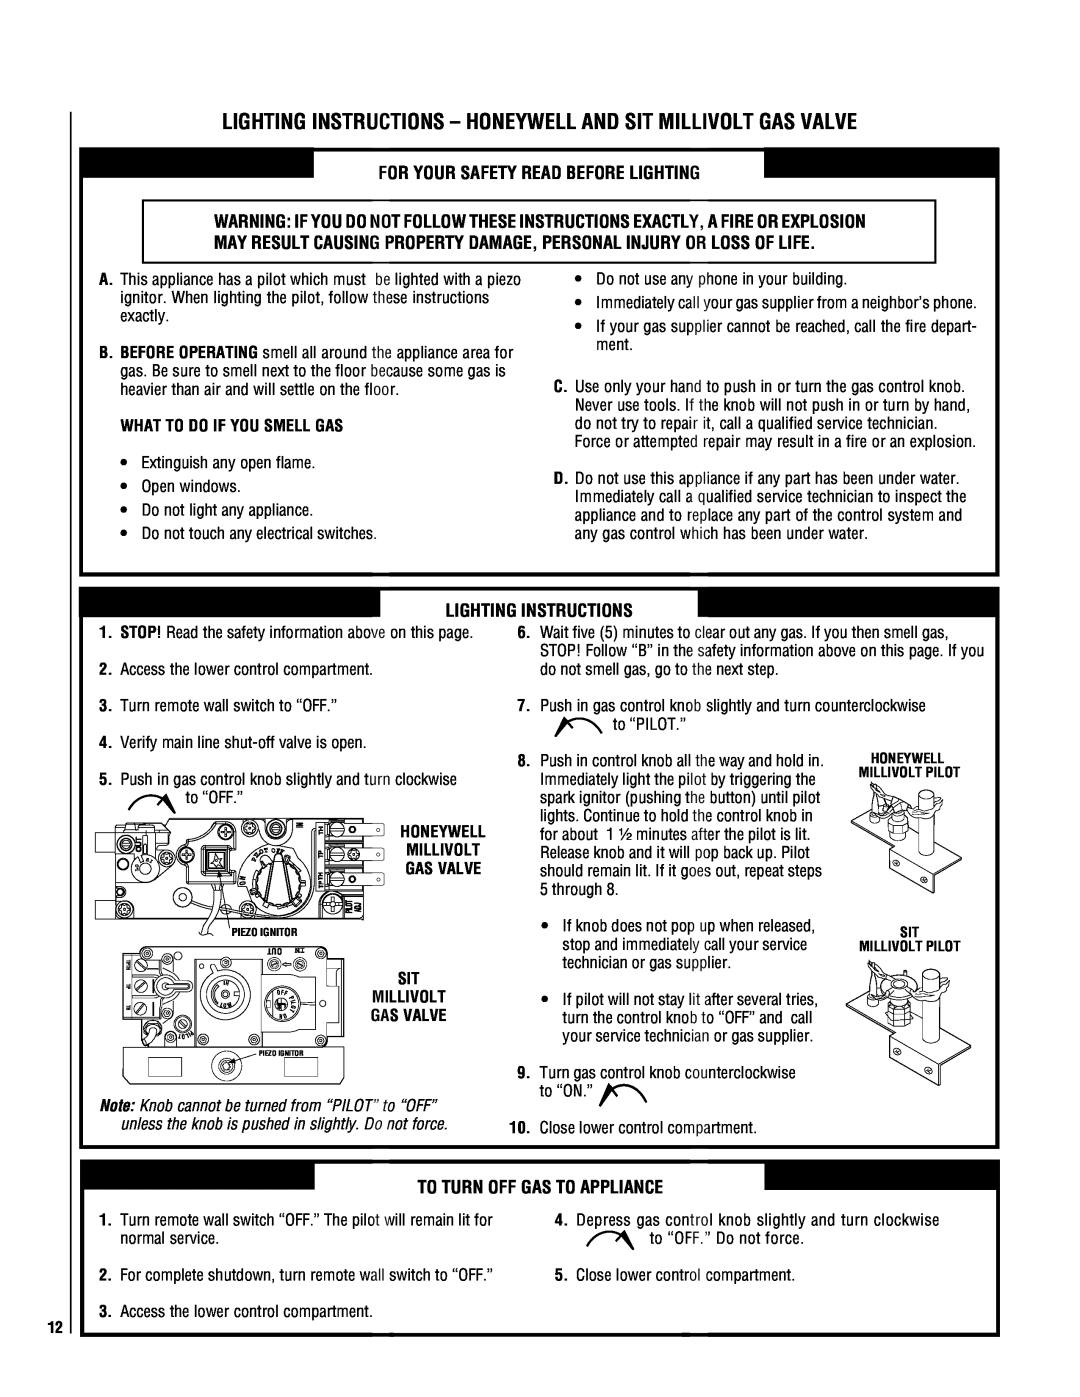 Superior DR500 manual For Your Safety Read Before Lighting, Lighting Instructions, To Turn Off Gas To Appliance, to “OFF.” 